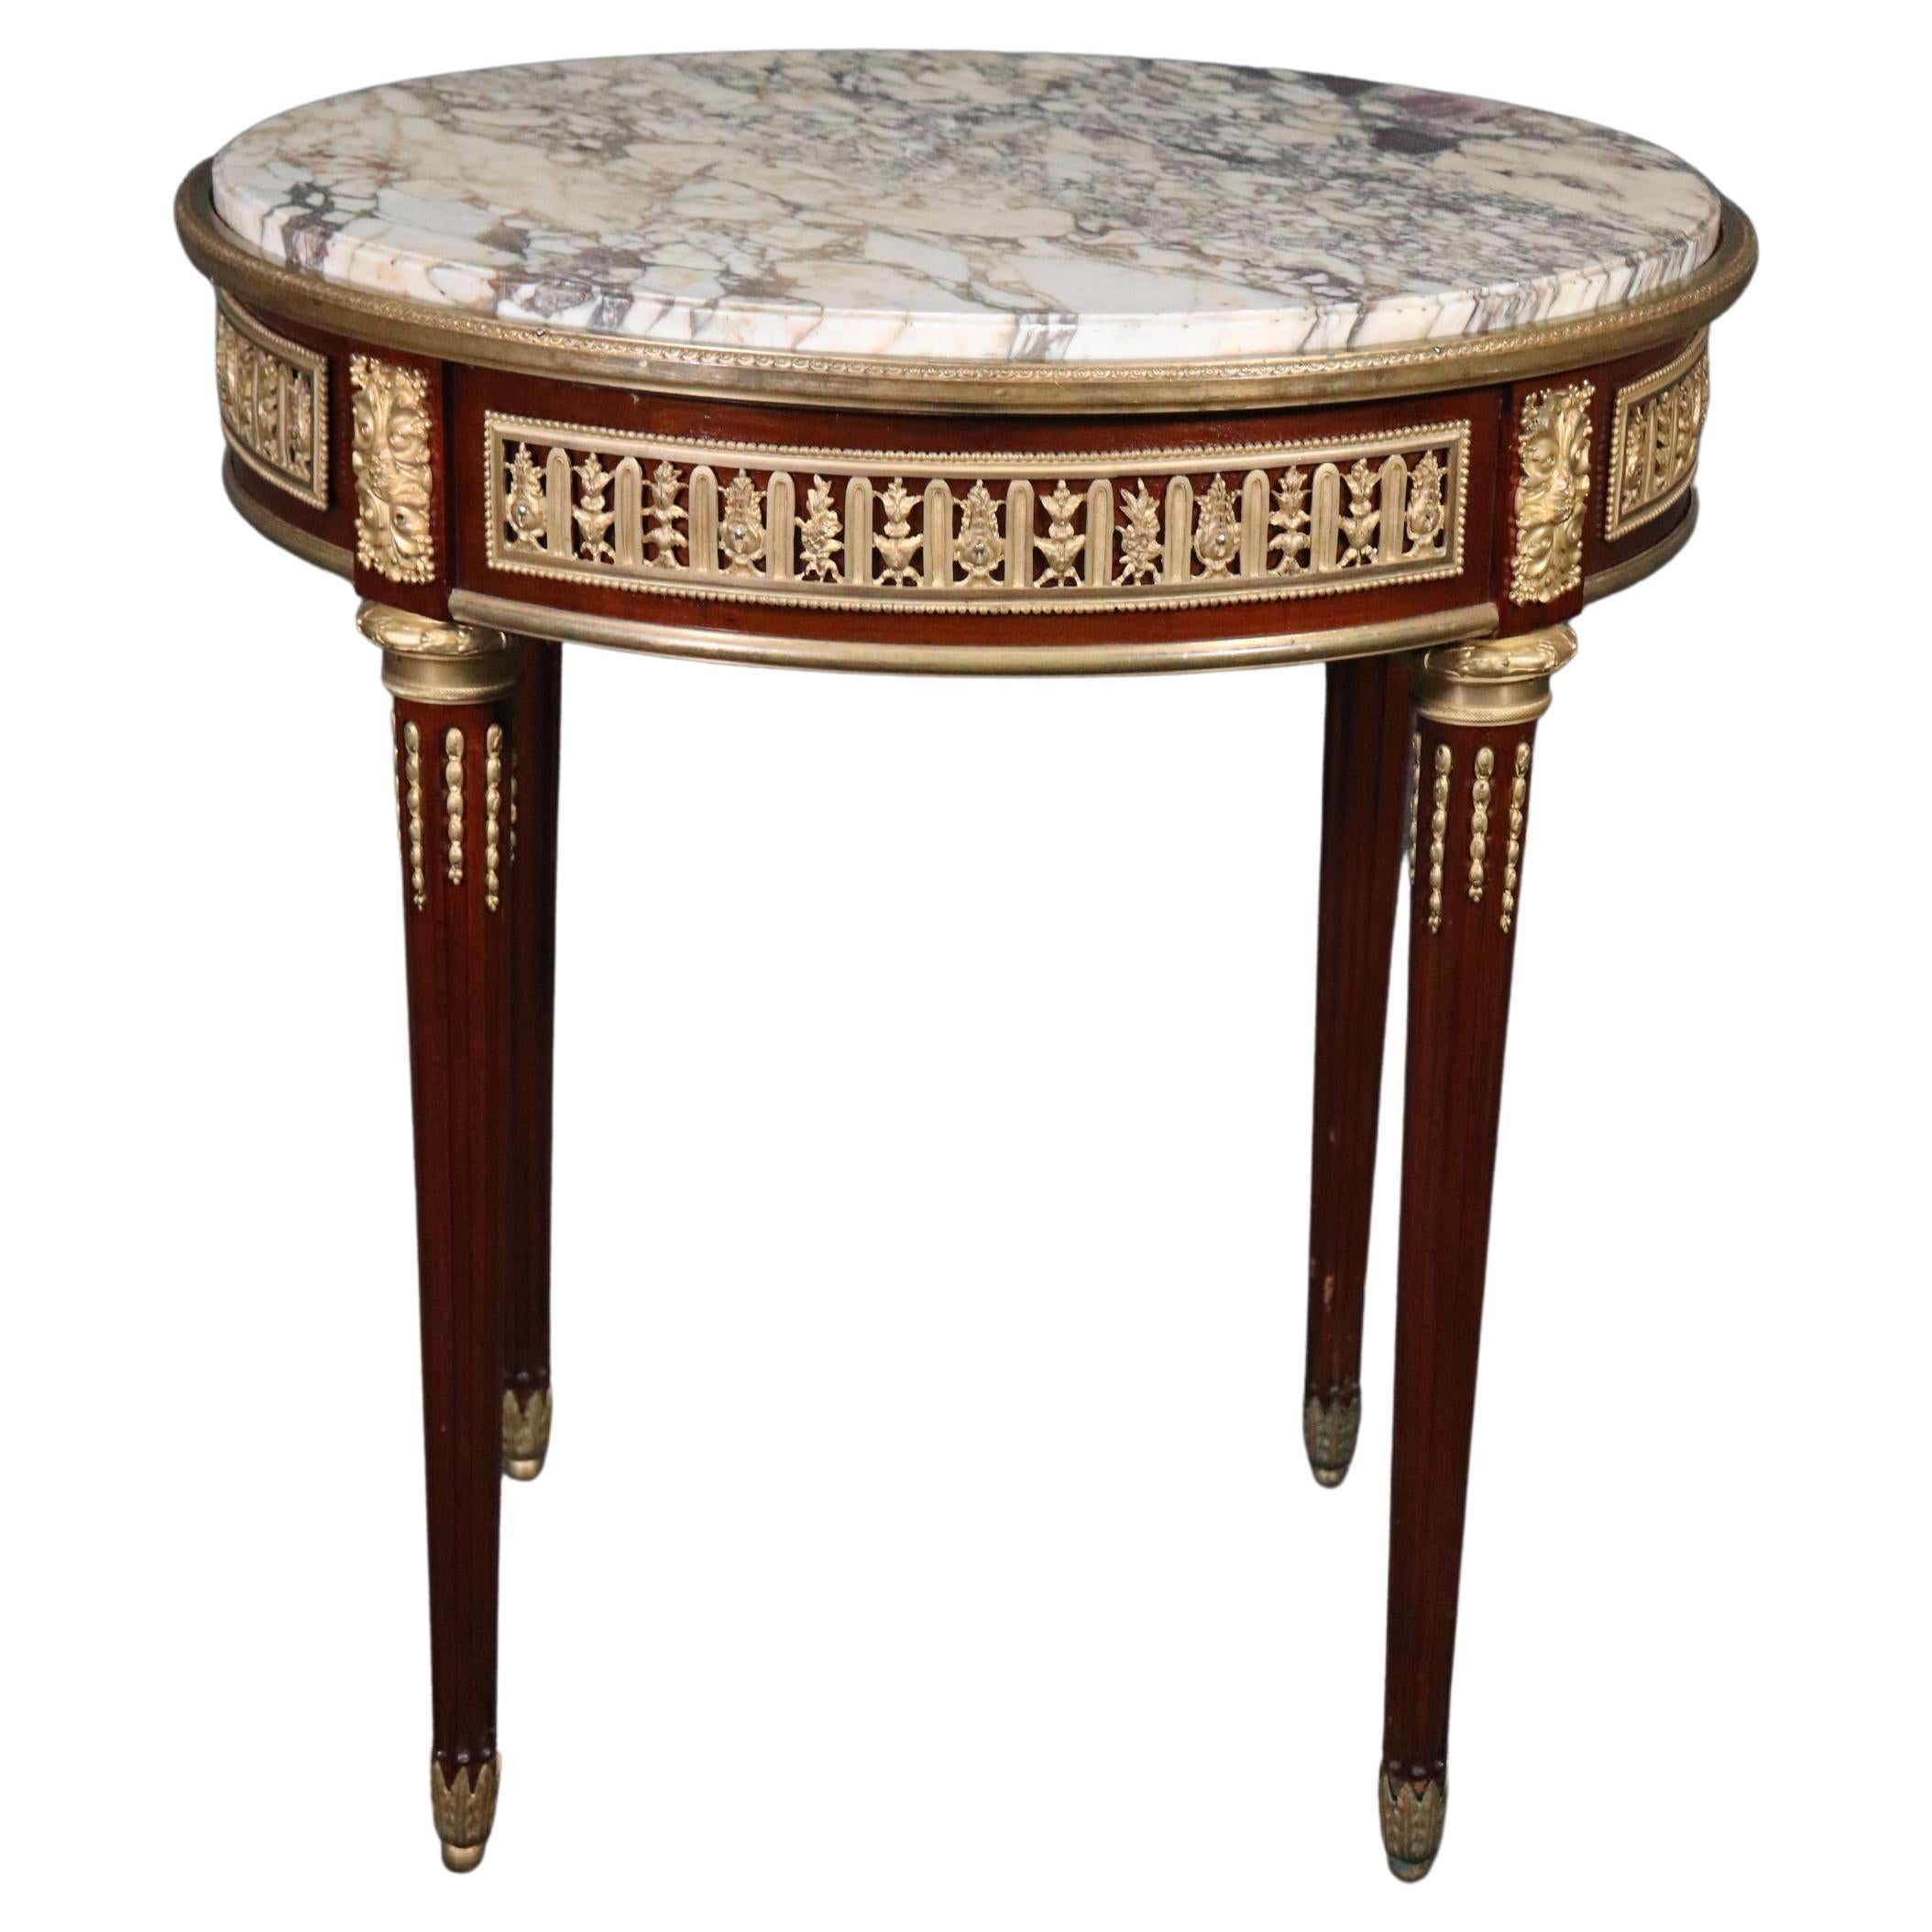 Manner of Linke Bronze Mounted French Marble Top Louis XVI Style Center Table